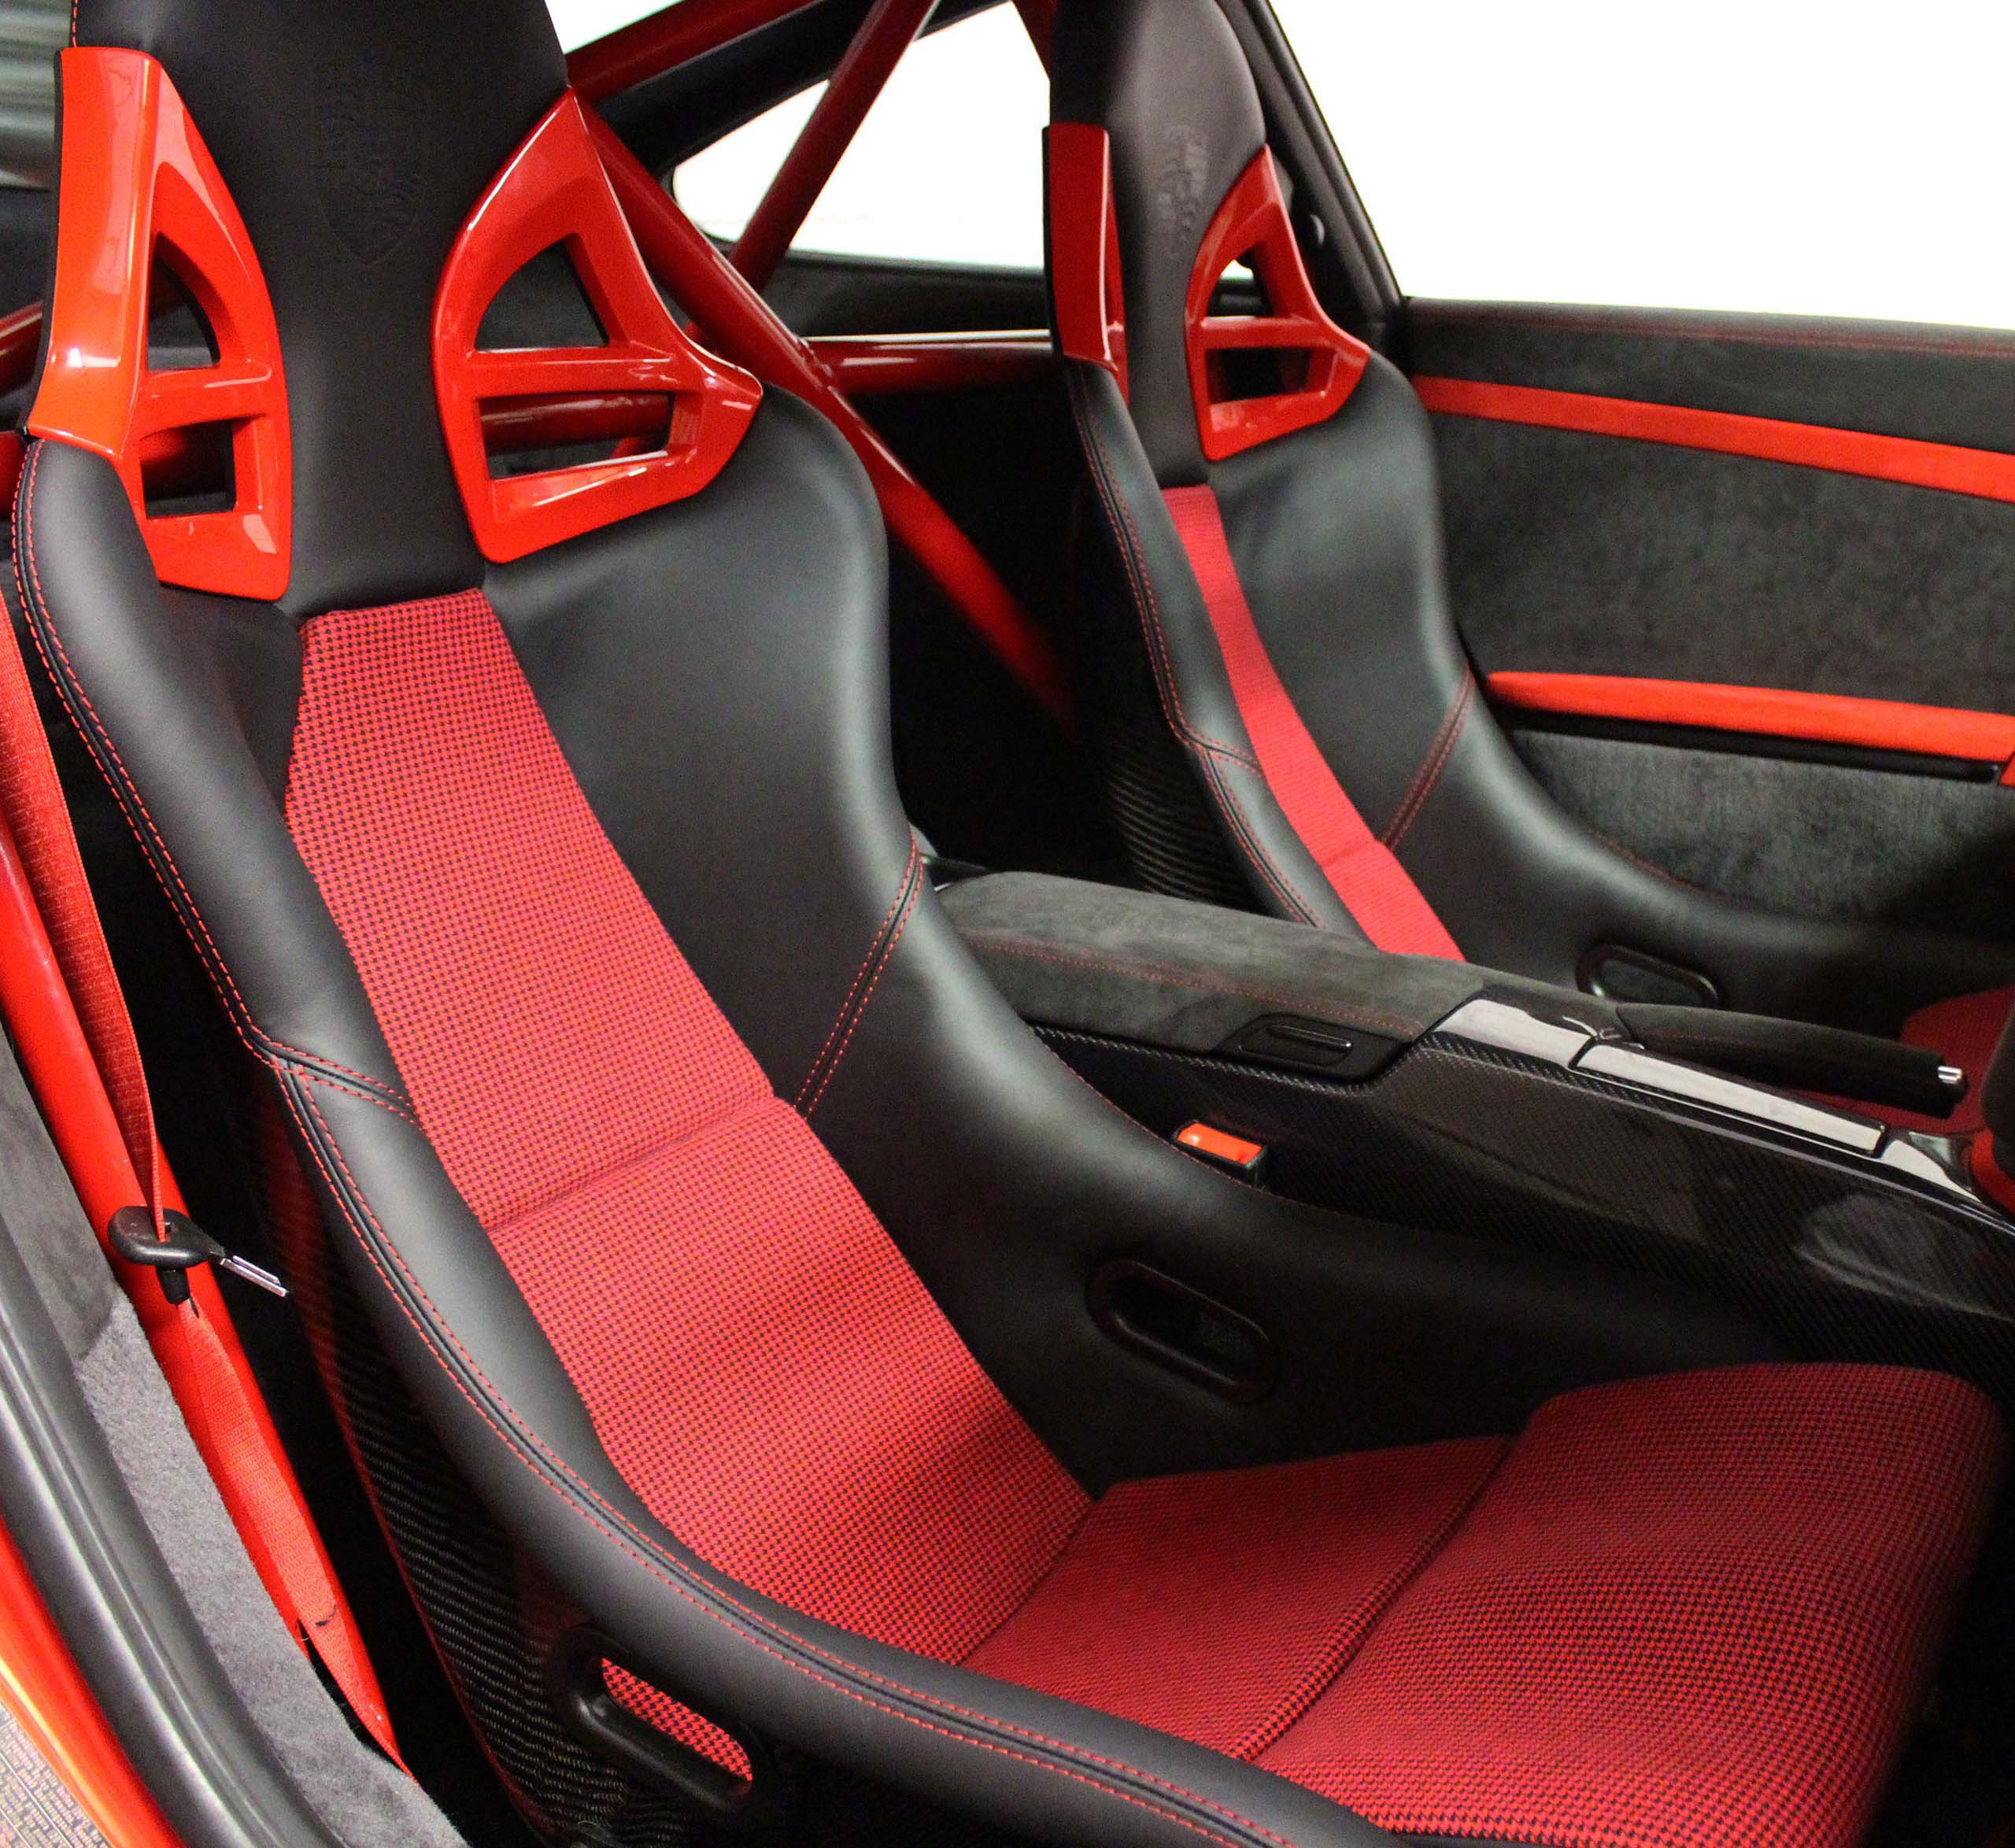 Porsche 911 997 gt3 GT style carbon bucket seats re trim retrimmed black leather red stitching pepita seat inserts red black by Designls